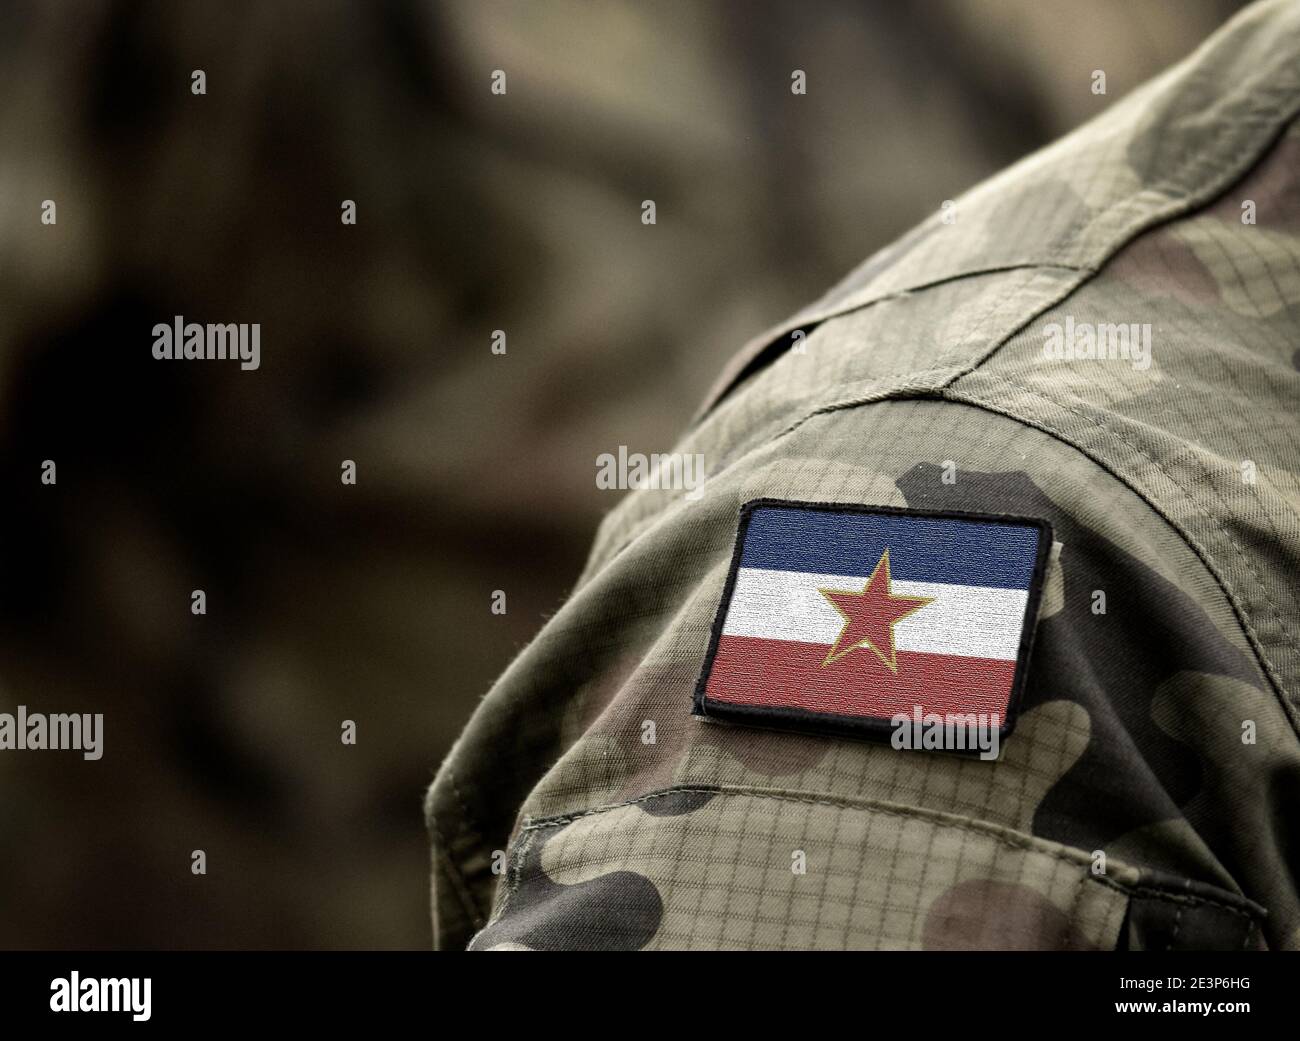 Flag of Yugoslavia on military uniform. Army, armed forces, soldiers. Collage. Stock Photo